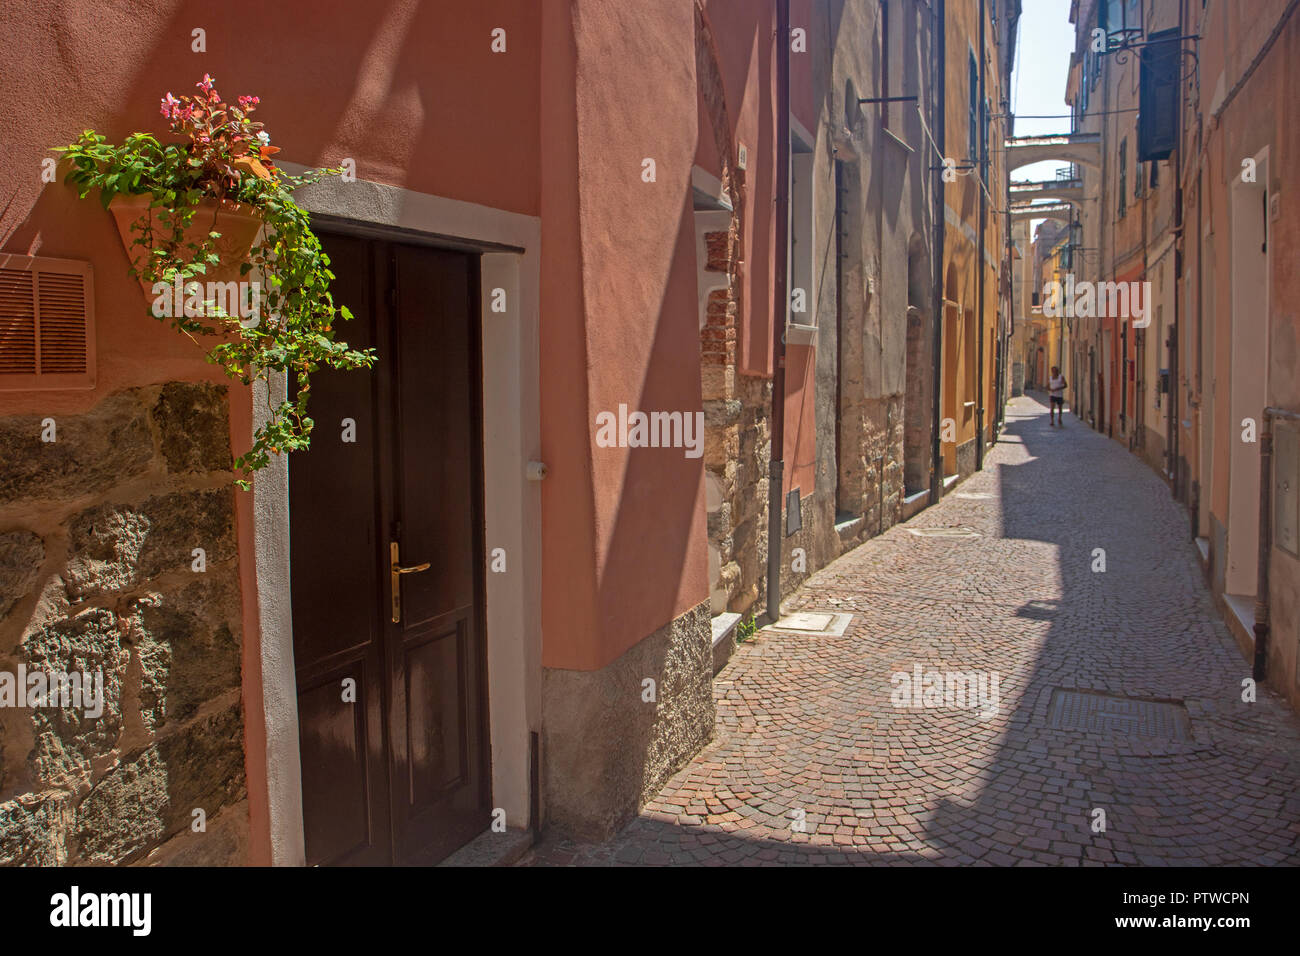 Laneway in the old town of Noli on the Italian Riviera Stock Photo